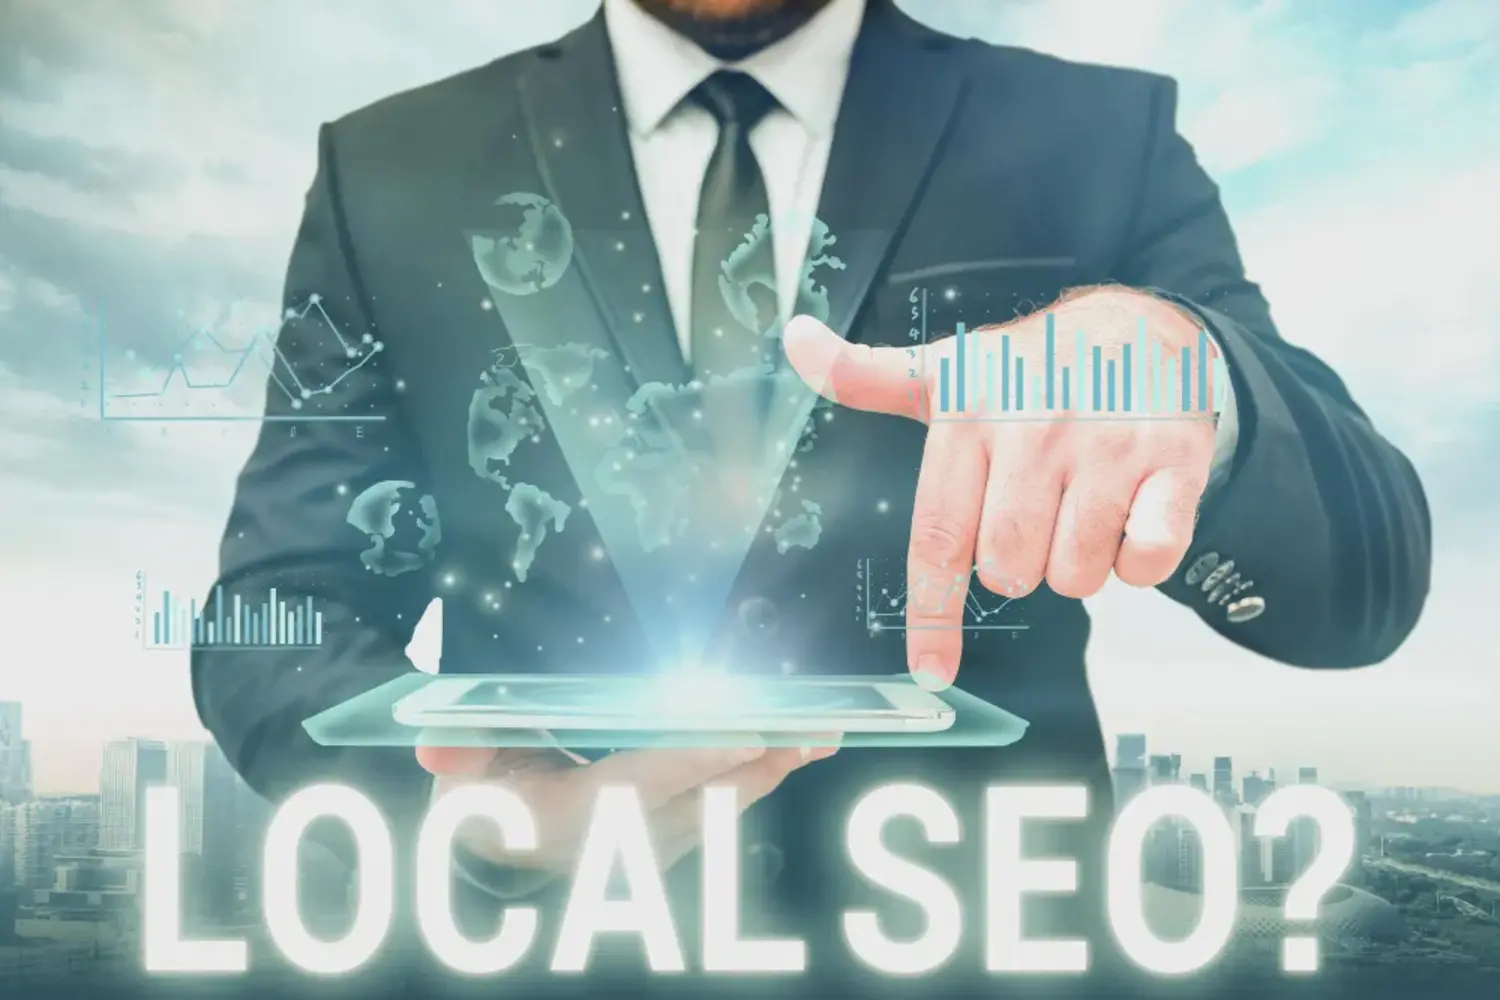 SEO Fort McMurray